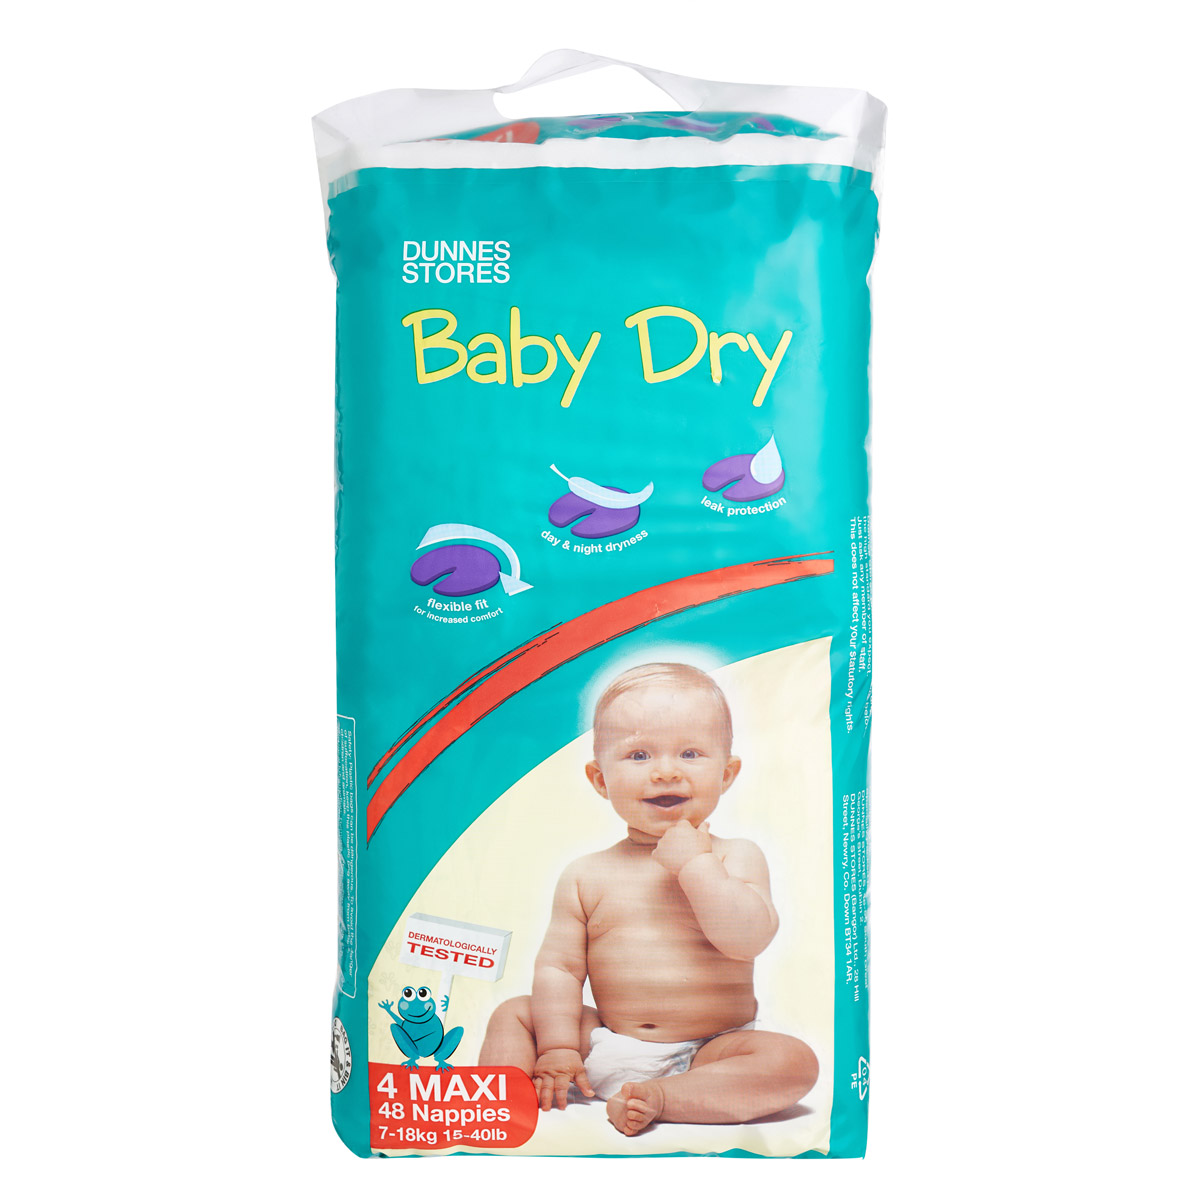 Dunnes Stores Baby Dry Maxi Size 